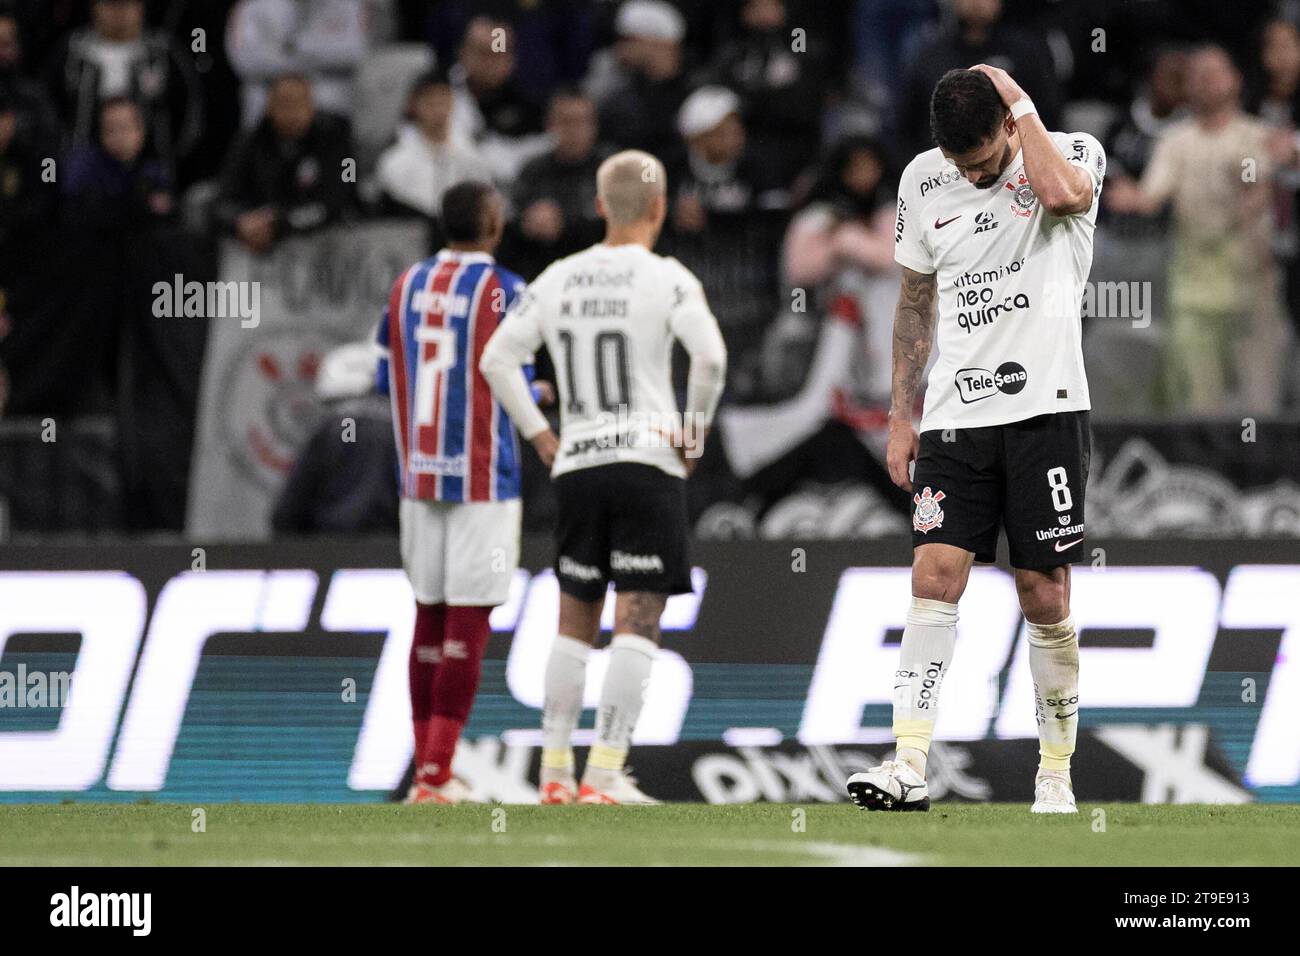 SÃO PAULO, SP - 24.11.2023: CORINTHIANS X BAHIA - Renato Augusto laments during the Corinthians x Bahia match held at the Neo Química Arena in São Paulo, SP. The game is valid for the 35th round of the Brasileirão 2023. (Photo: Marco Galvão/Fotoarena) Stock Photo